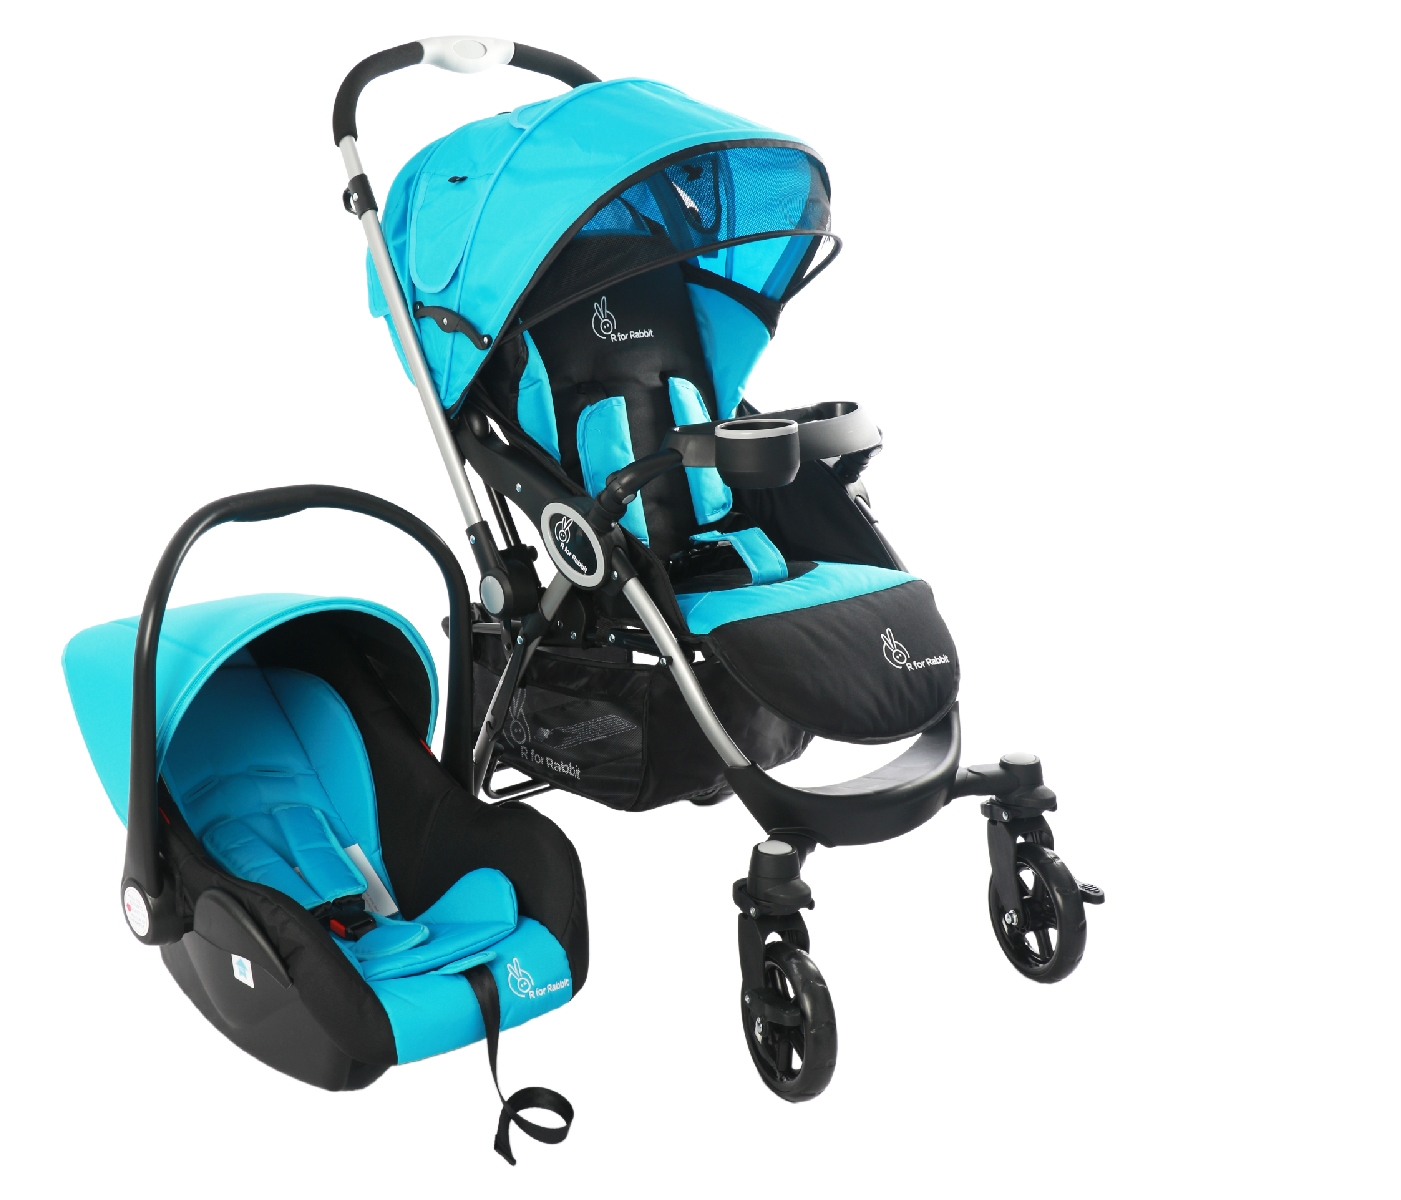 Mothercare | R For Rabbit Chcocolate Ride Travel System Blue Black 0